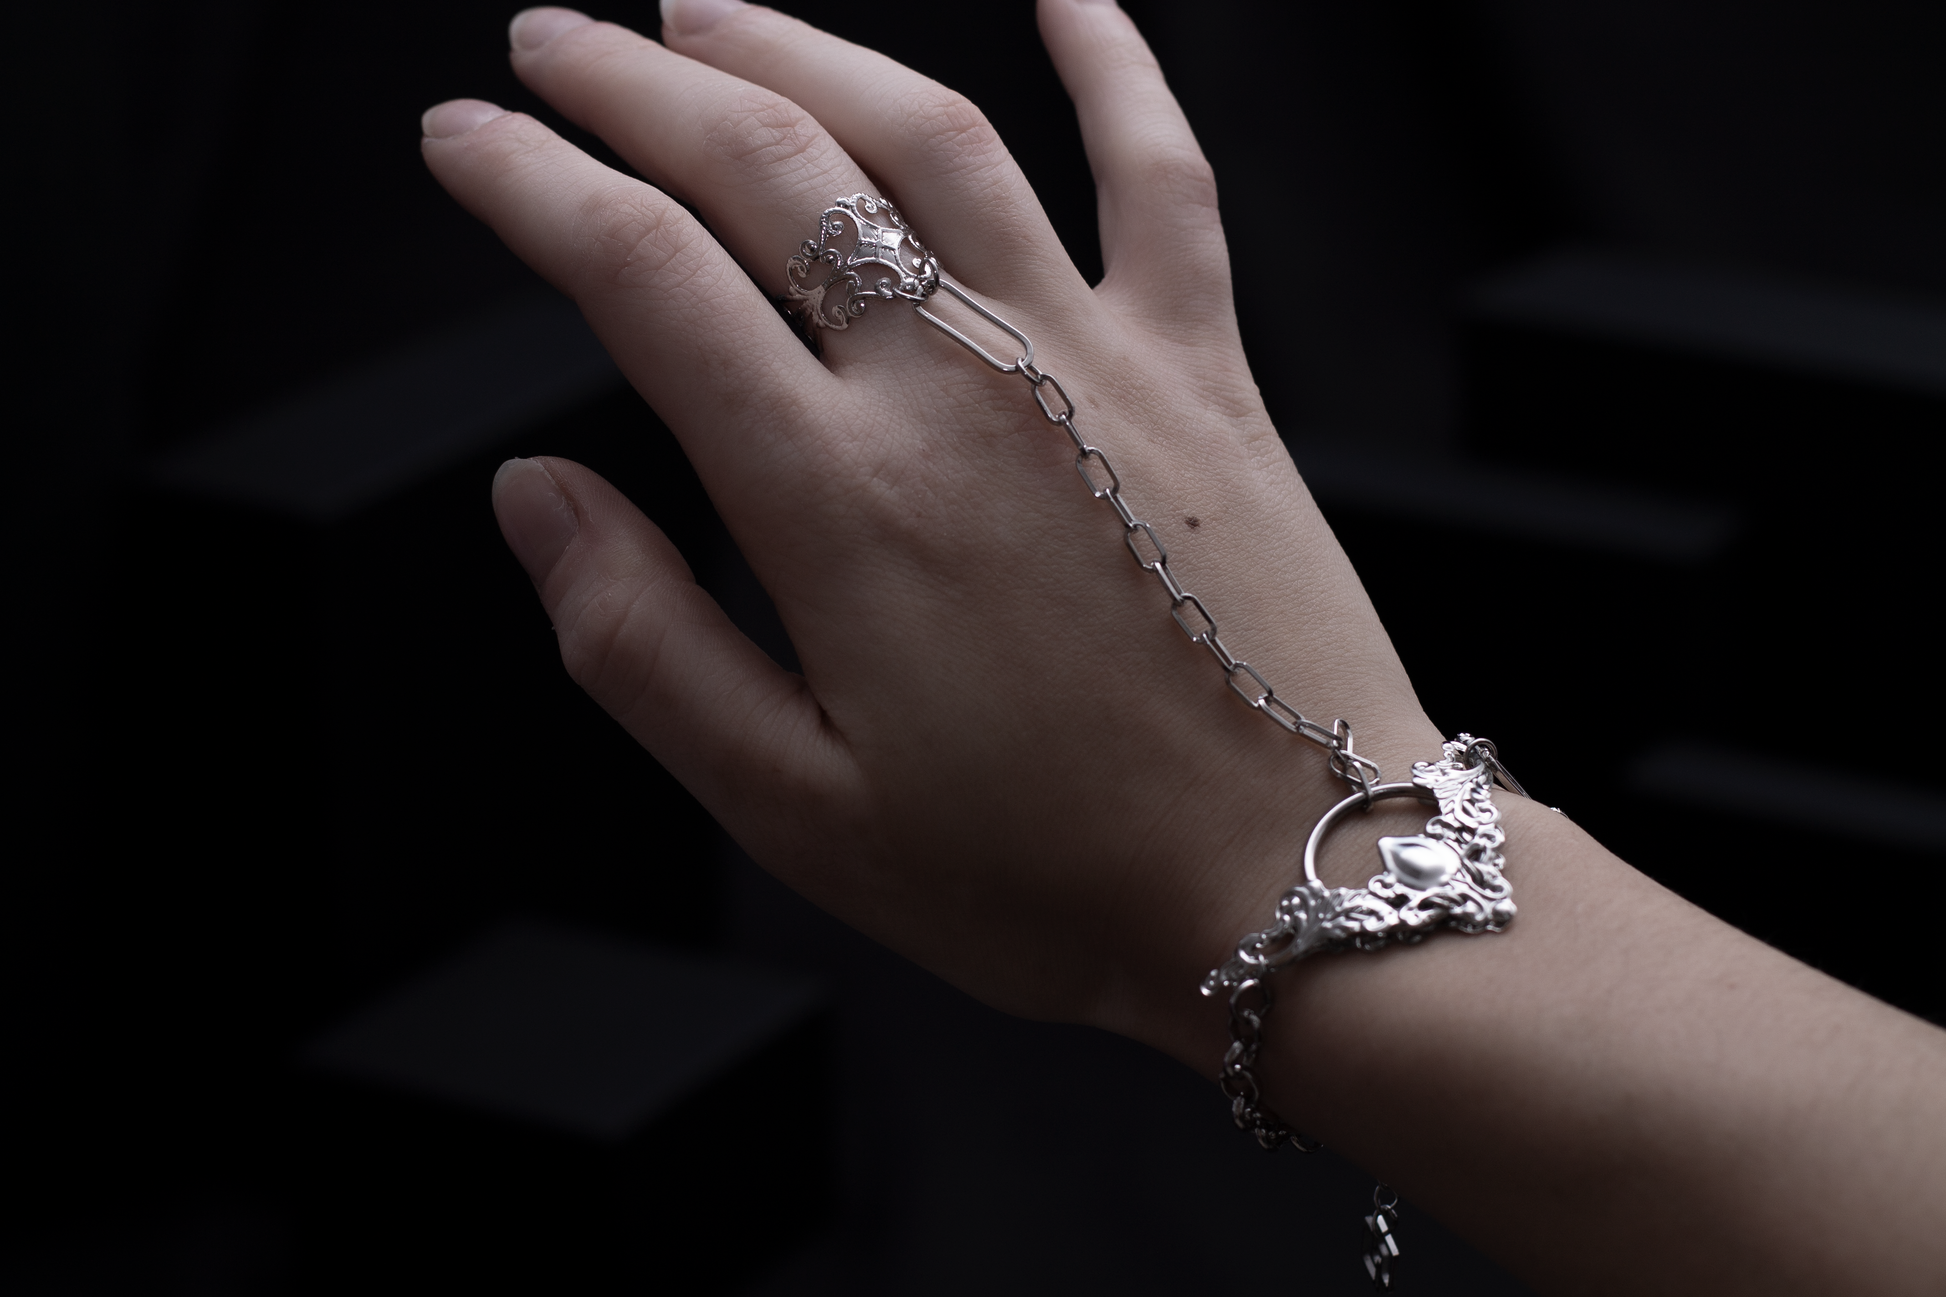 A graceful hand adorned with a Myril Jewels hand chain bracelet ring, showcasing neo-gothic elegance. The intricate design captures a dark-avantgarde essence, perfect for gothic and alternative styles, and is versatile for everyday wear, festival fashion, or as a unique gift for a goth girlfriend.